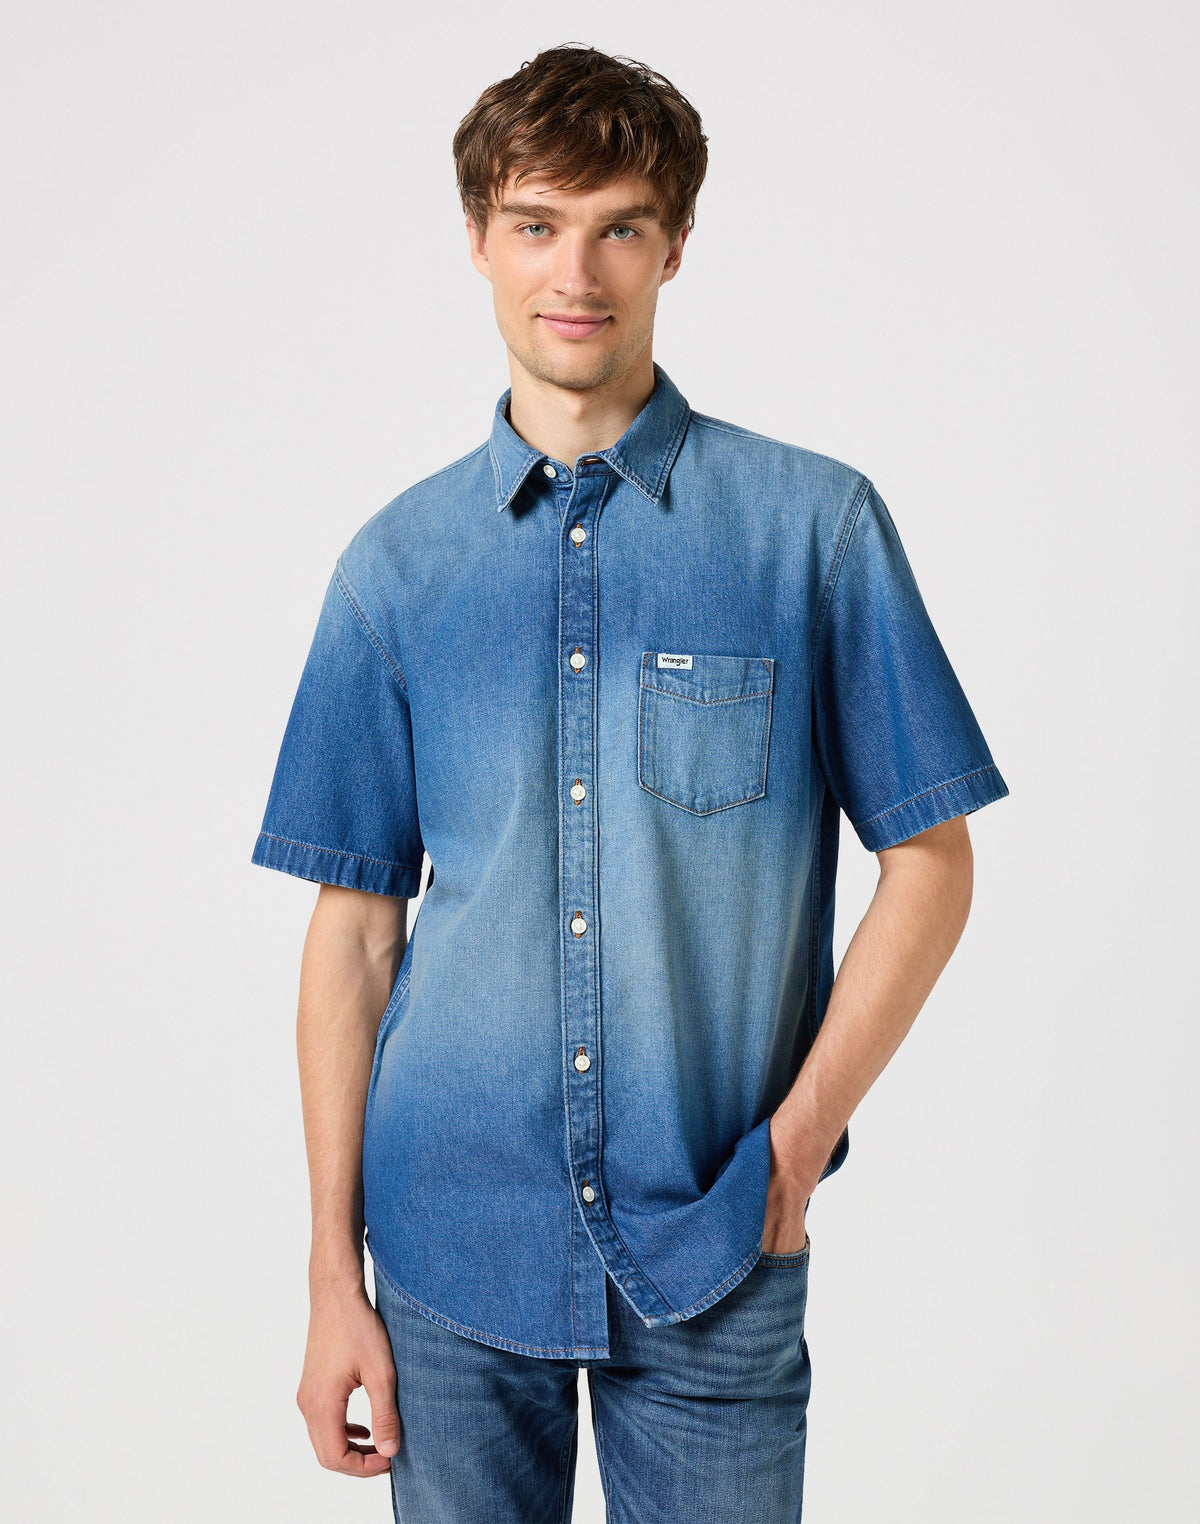 One Pocket Shirt in Mid Stone